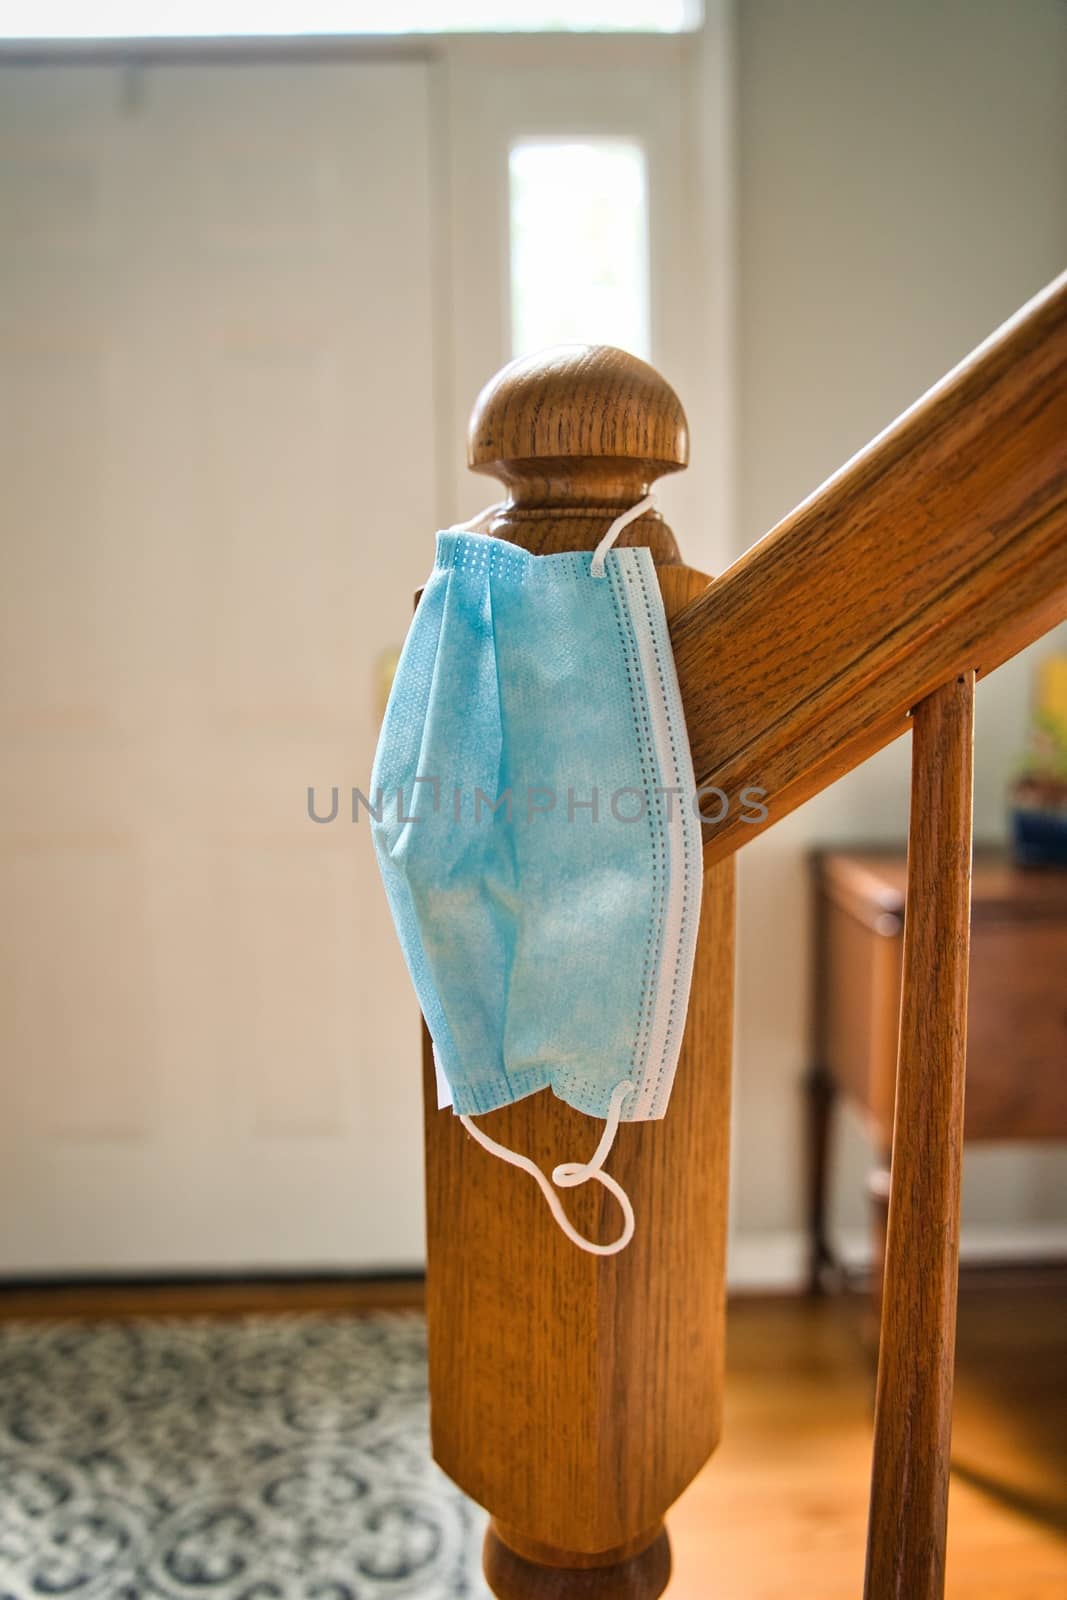 Mask hanging on stair railing looking towards entrance of home. Symbolic of need to wear face mask when leaving home for protecting from COVID-19